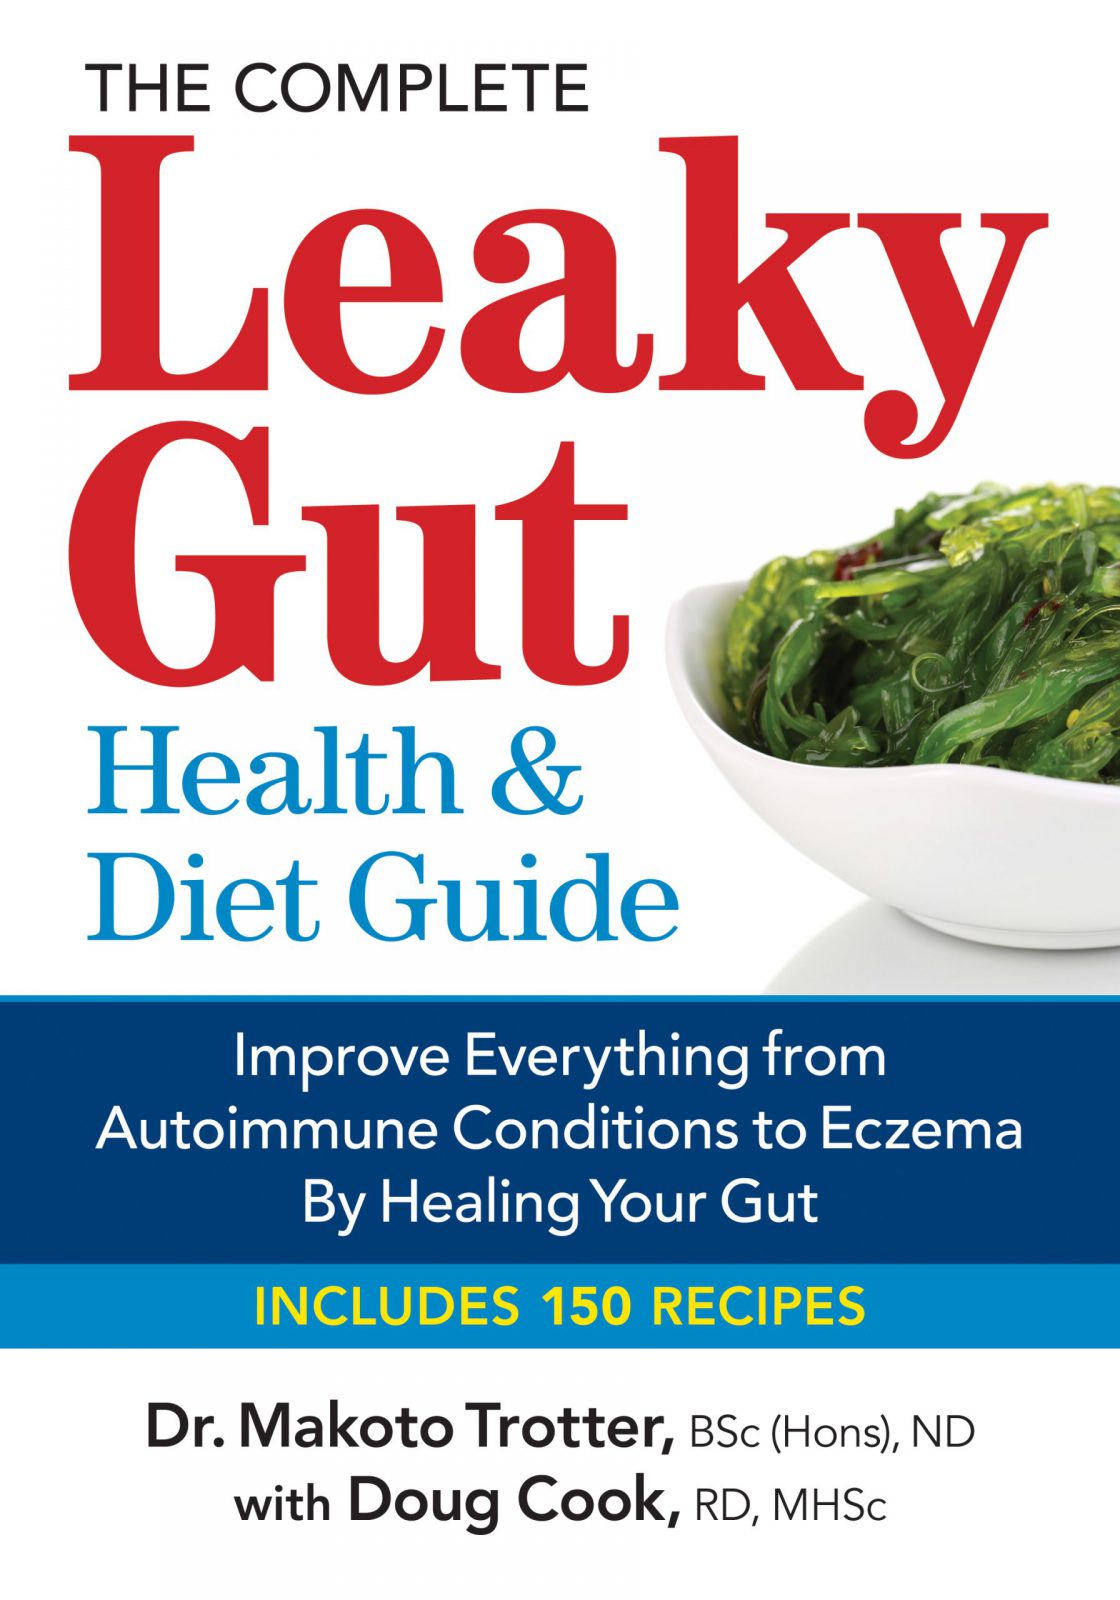 The Complete Leaky Gut Health and Diet Guide